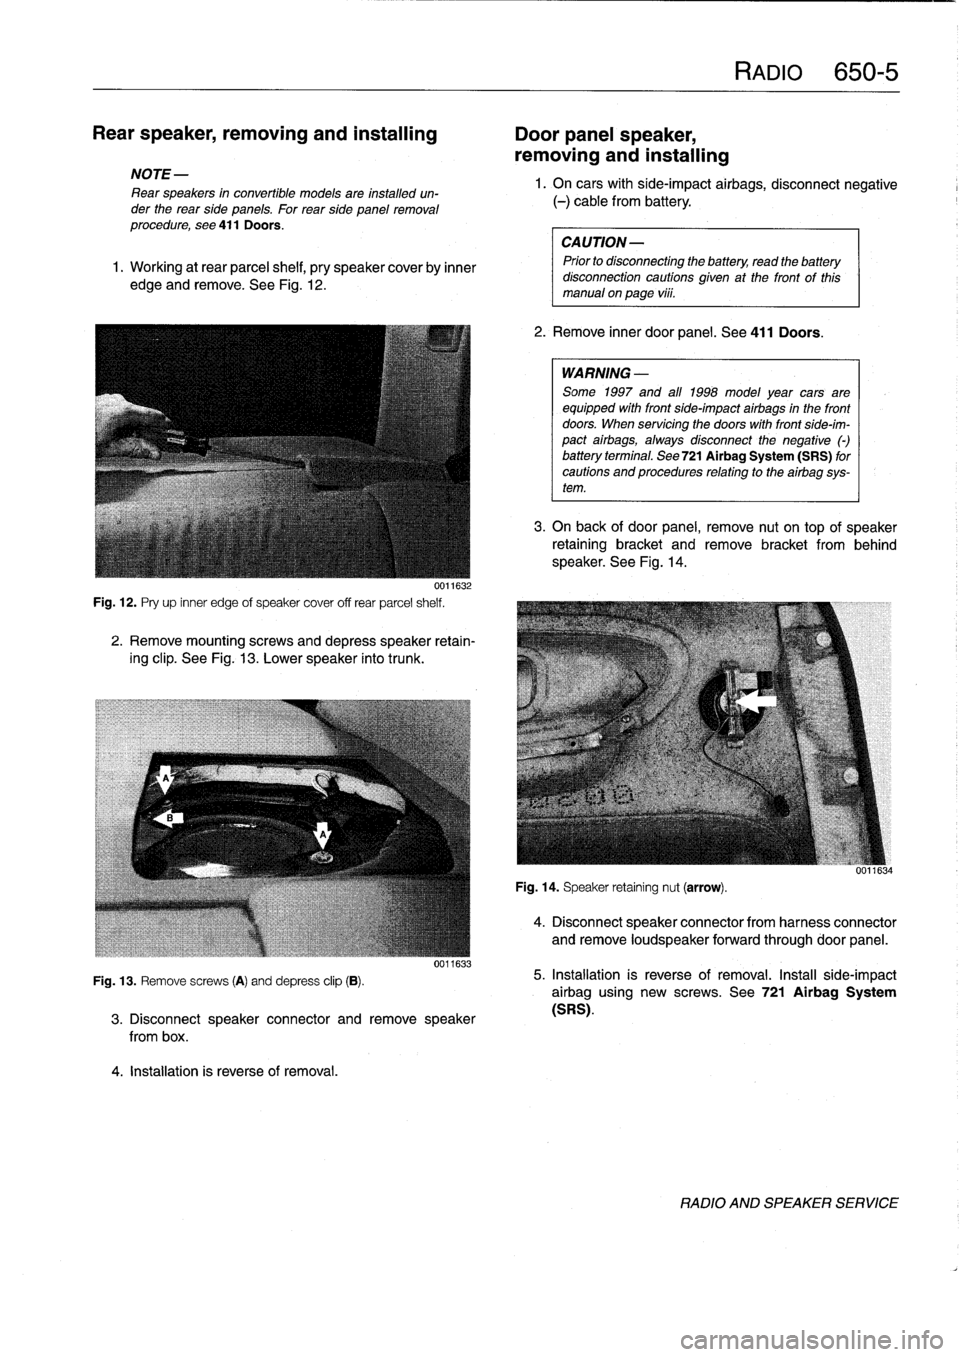 BMW M3 1993 E36 User Guide 
Rear
speaker,
removing
and
installing

	

Door
panel
speaker,

removing
and
installing

NOTE
-

Rear
speakers
in
convertible
models
are
installed
un-
der
the
rear
side
panels
.
For
rearside
panelremo